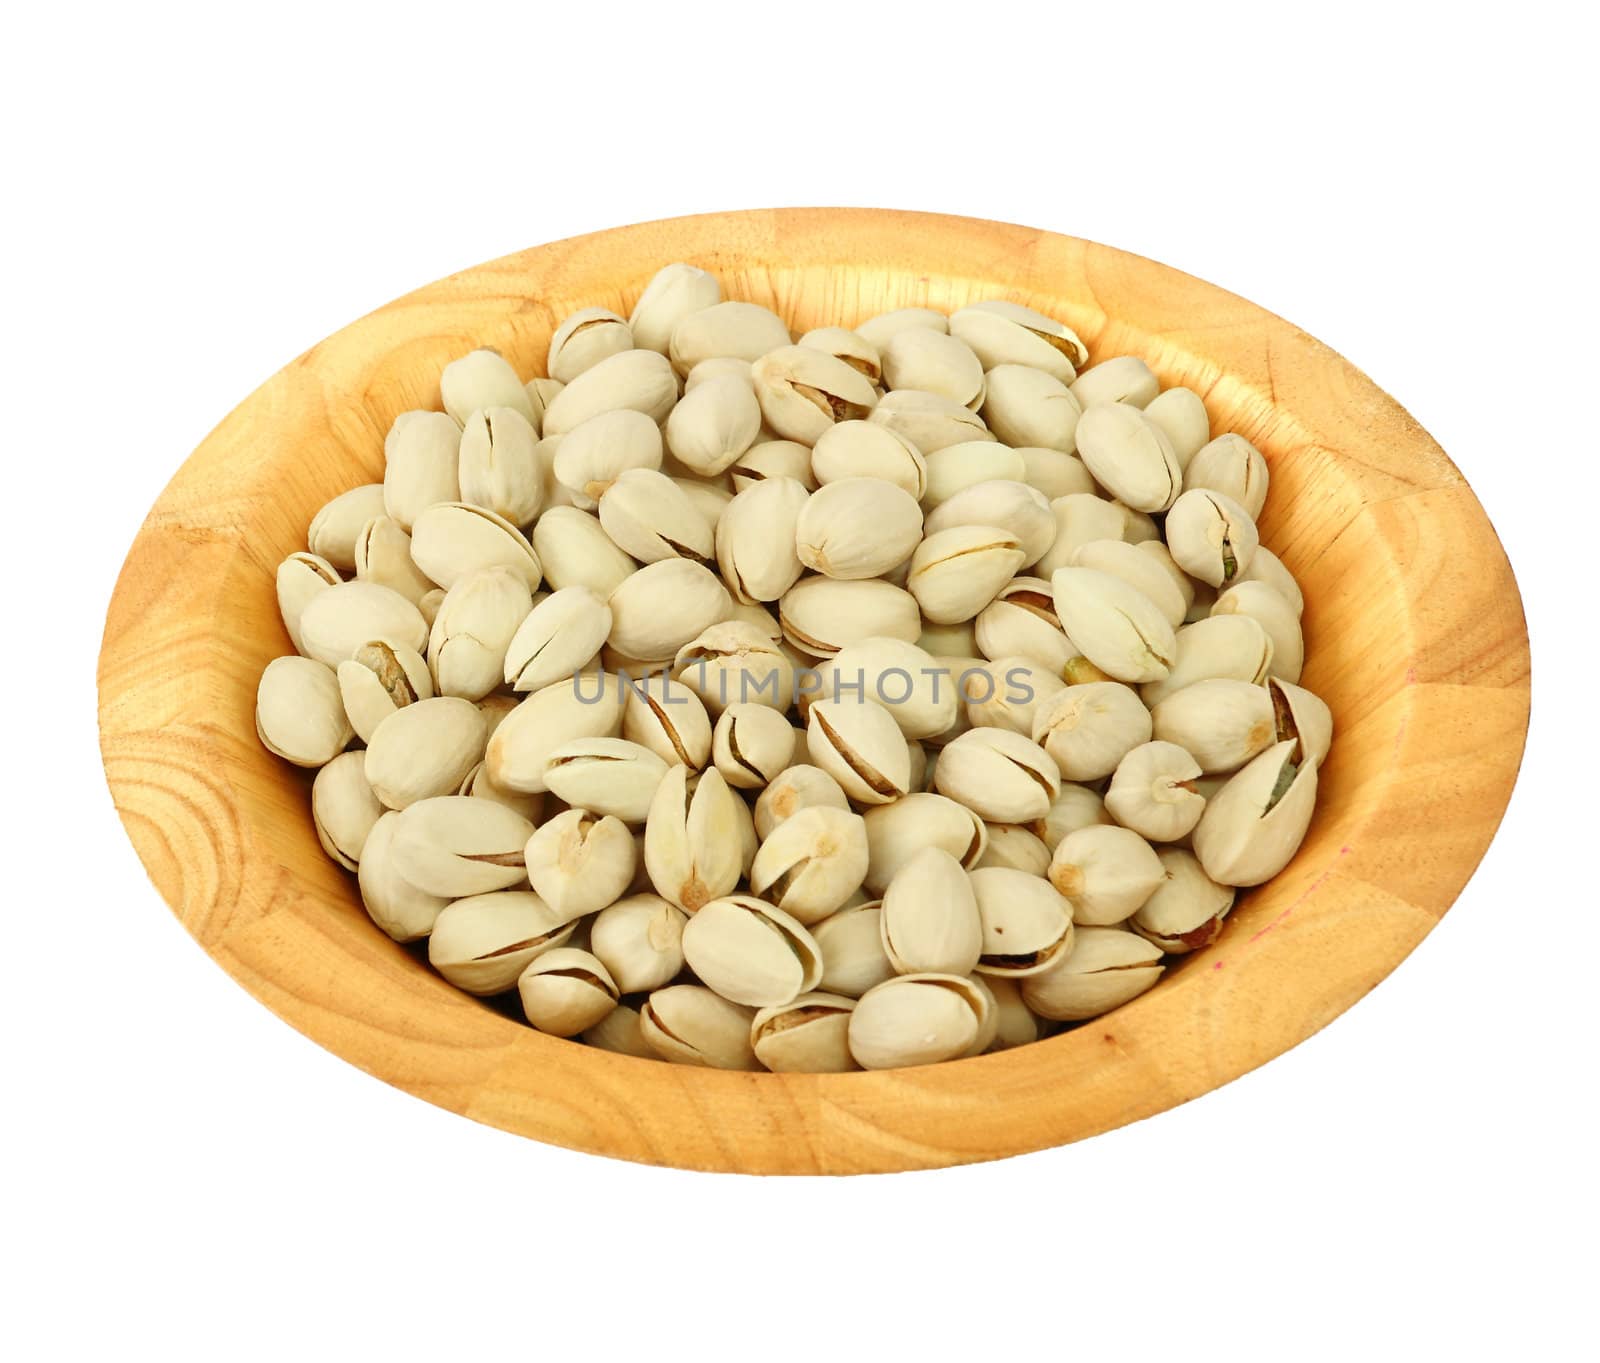 Pistachio nuts in a wooden bowl on white background 